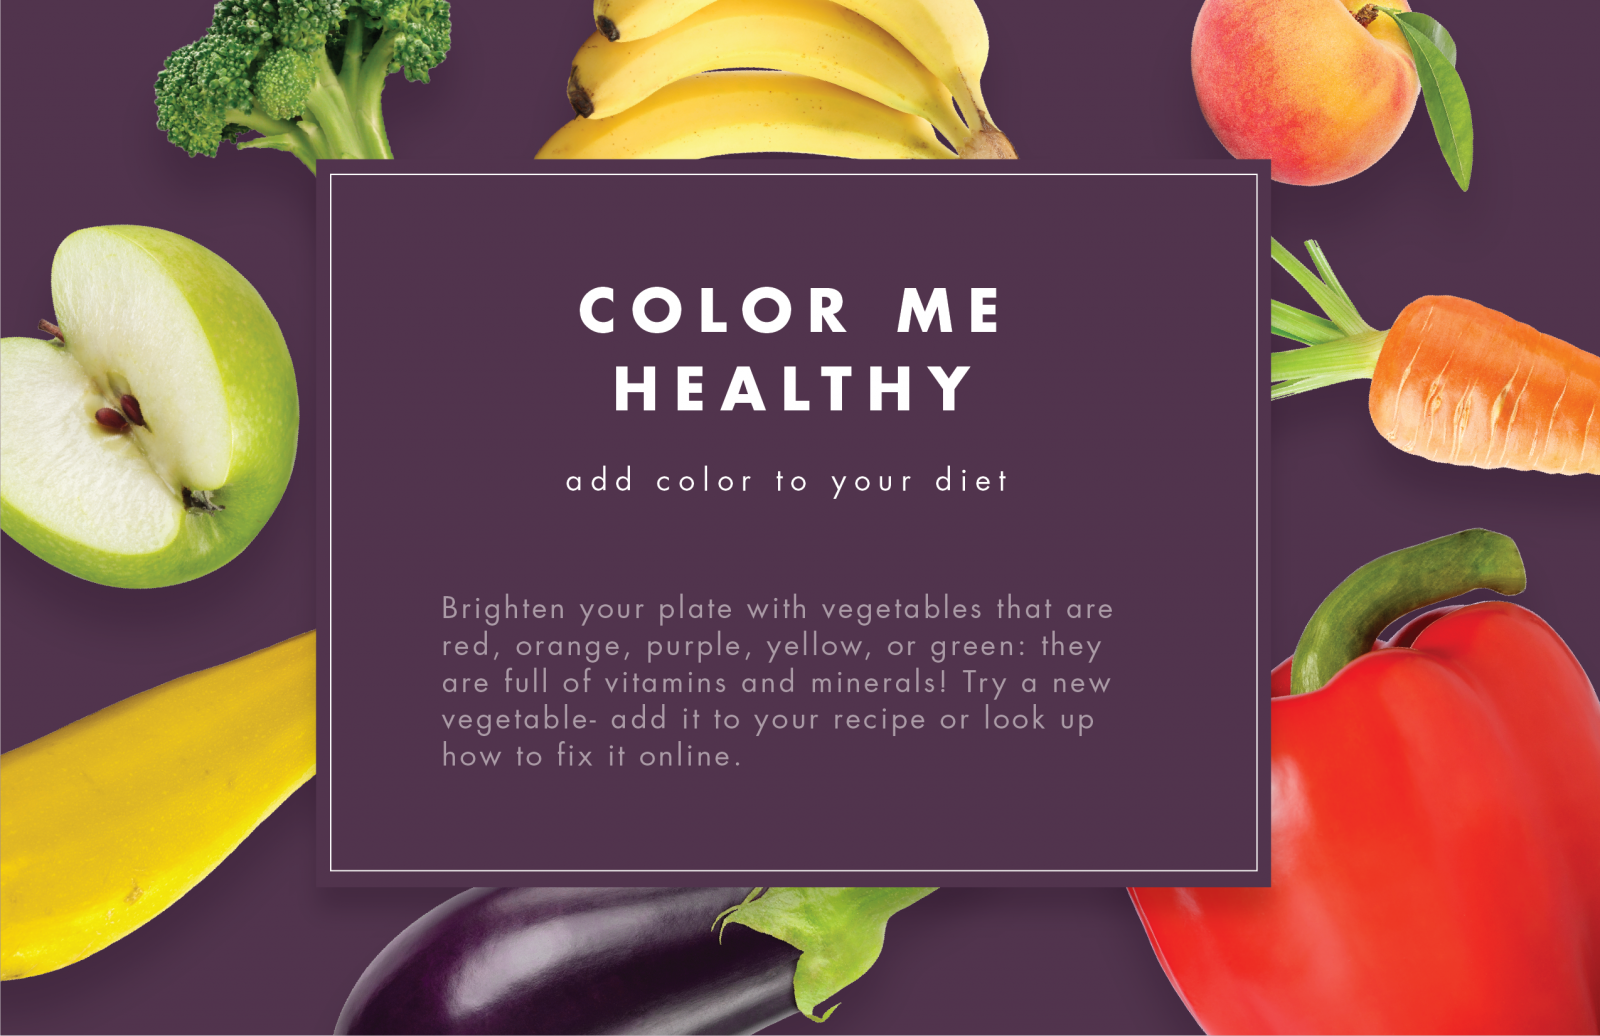 colormehealthy2-04